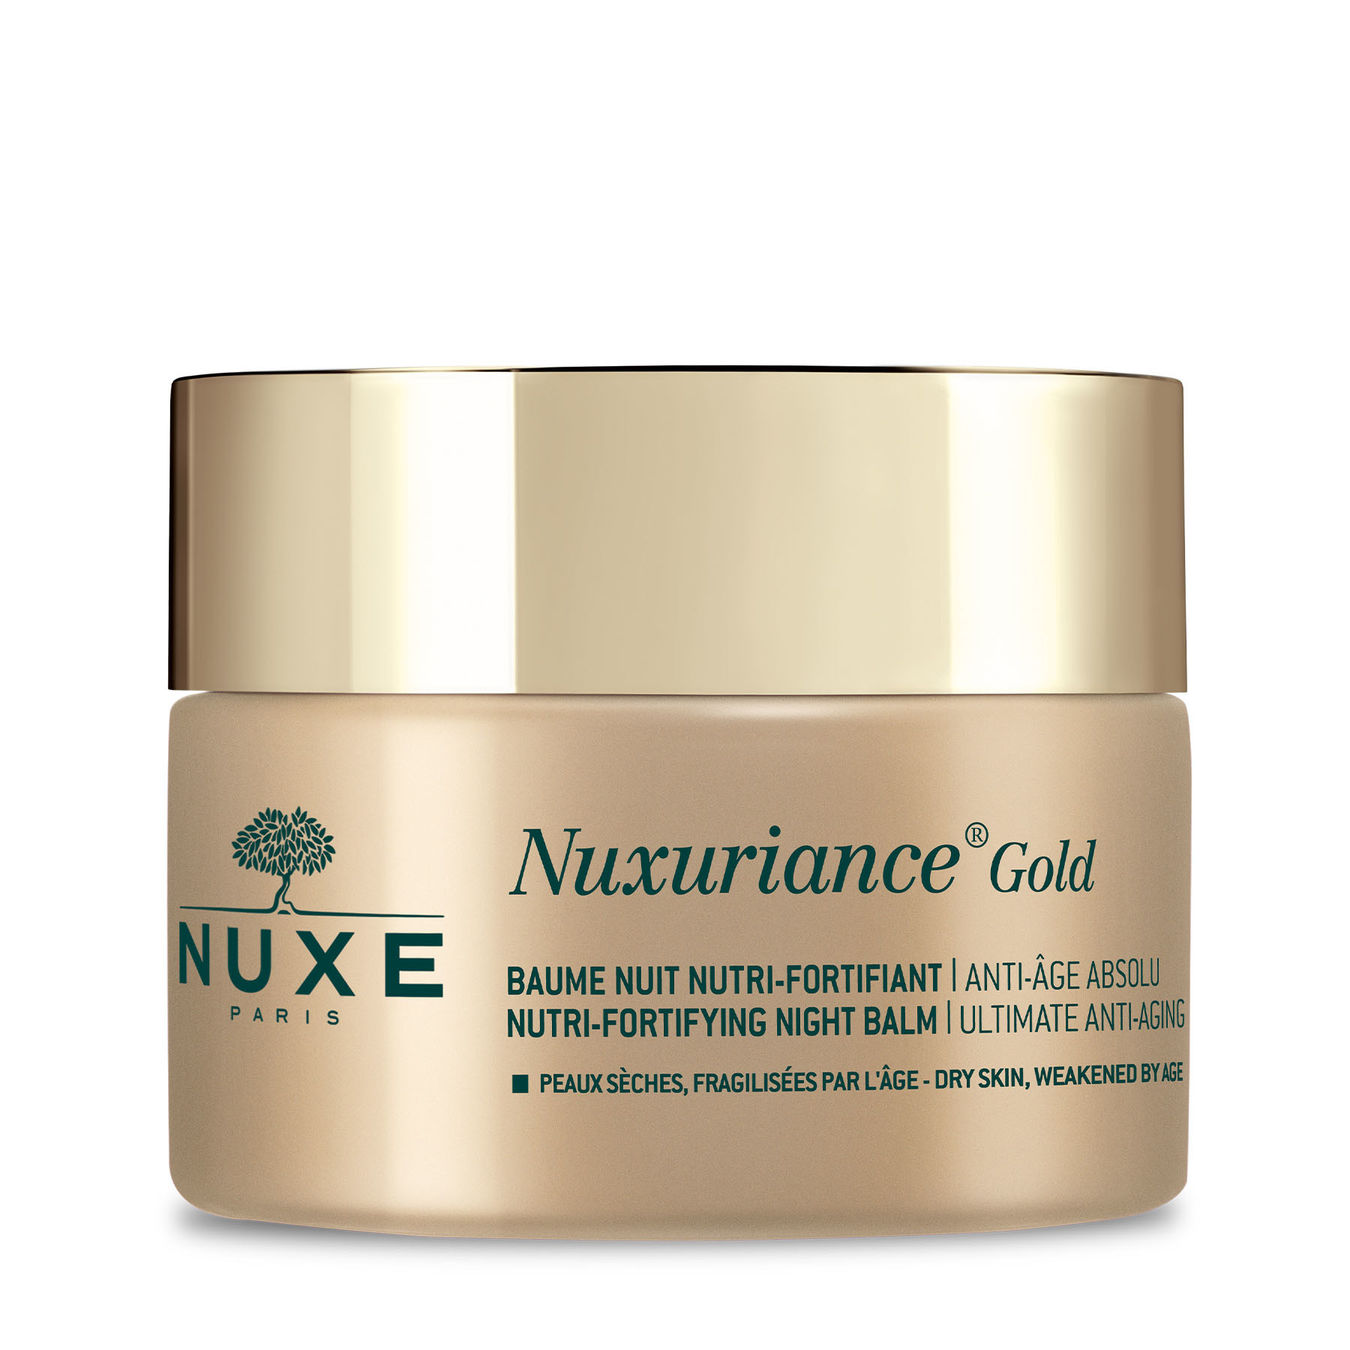 NUXE Nuxuriance Gold Baume Nuit Nutri-Fortifiante 50ml Damen von Nuxe